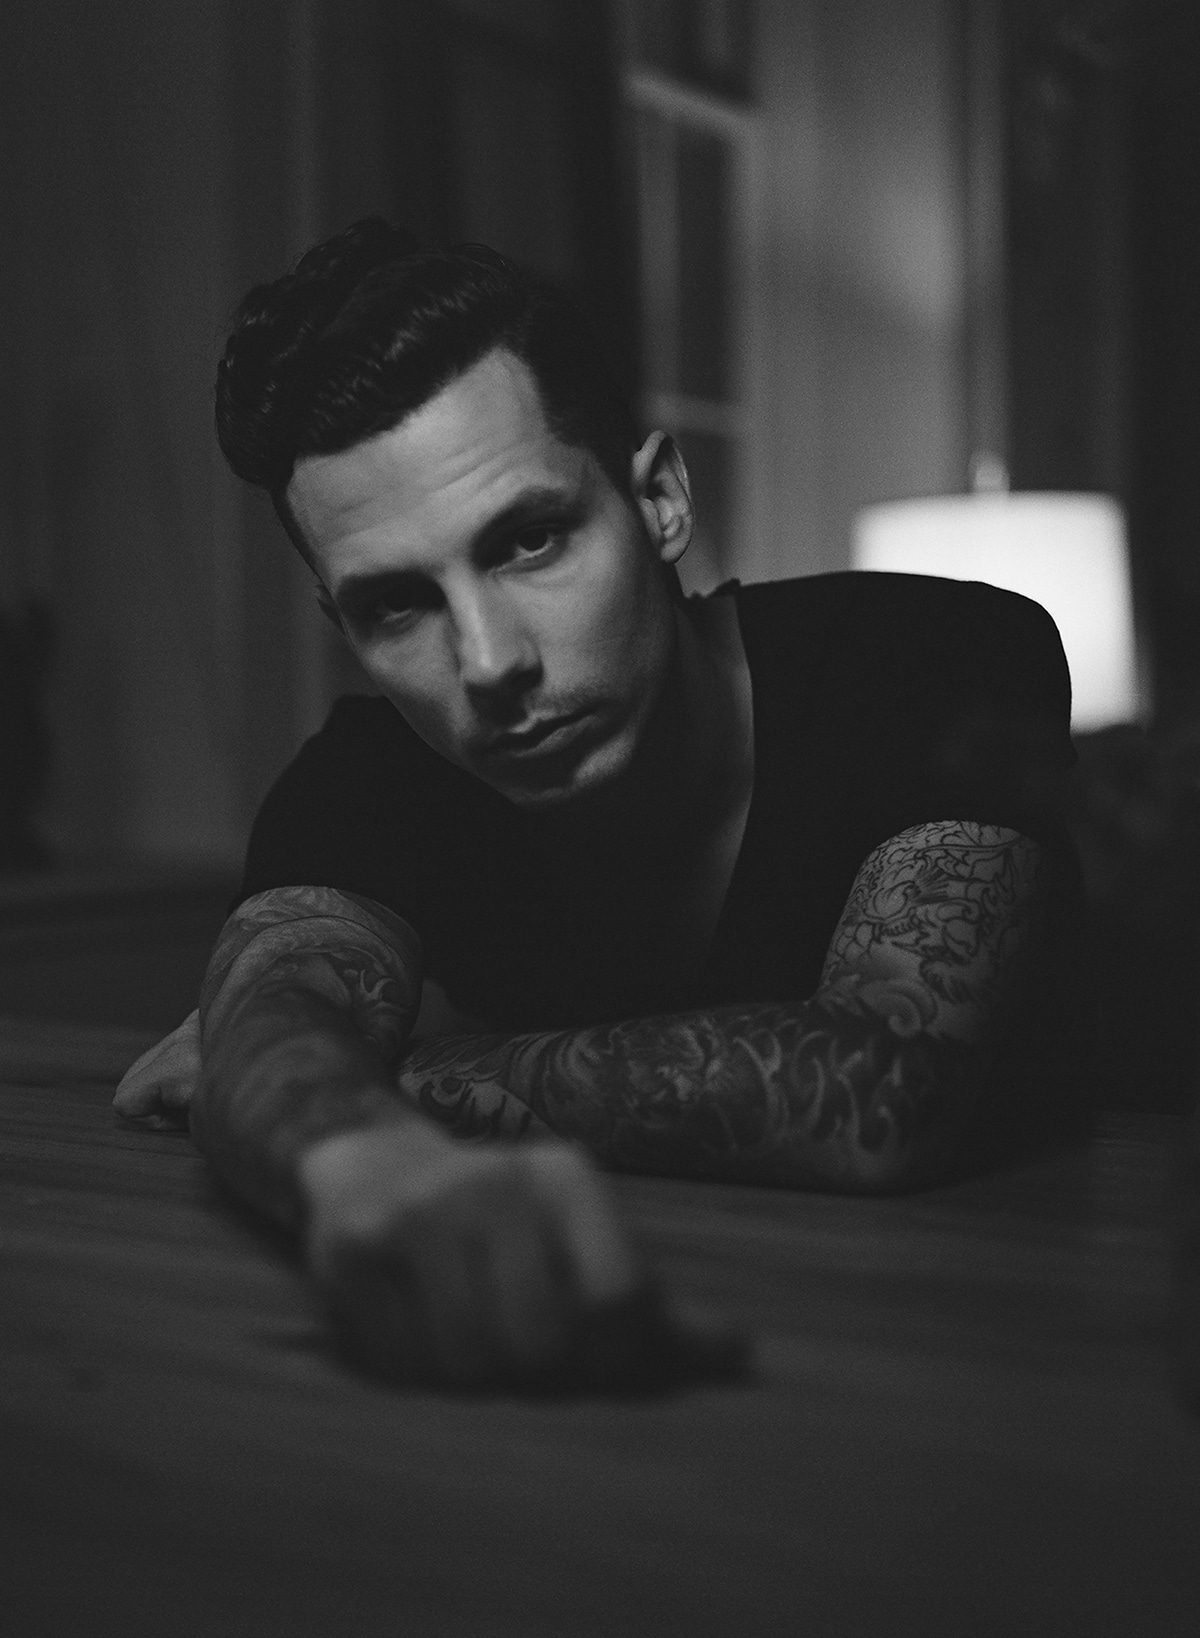 Watch Devin Dawson Perform “Dark Horse” for The Vault Sessions